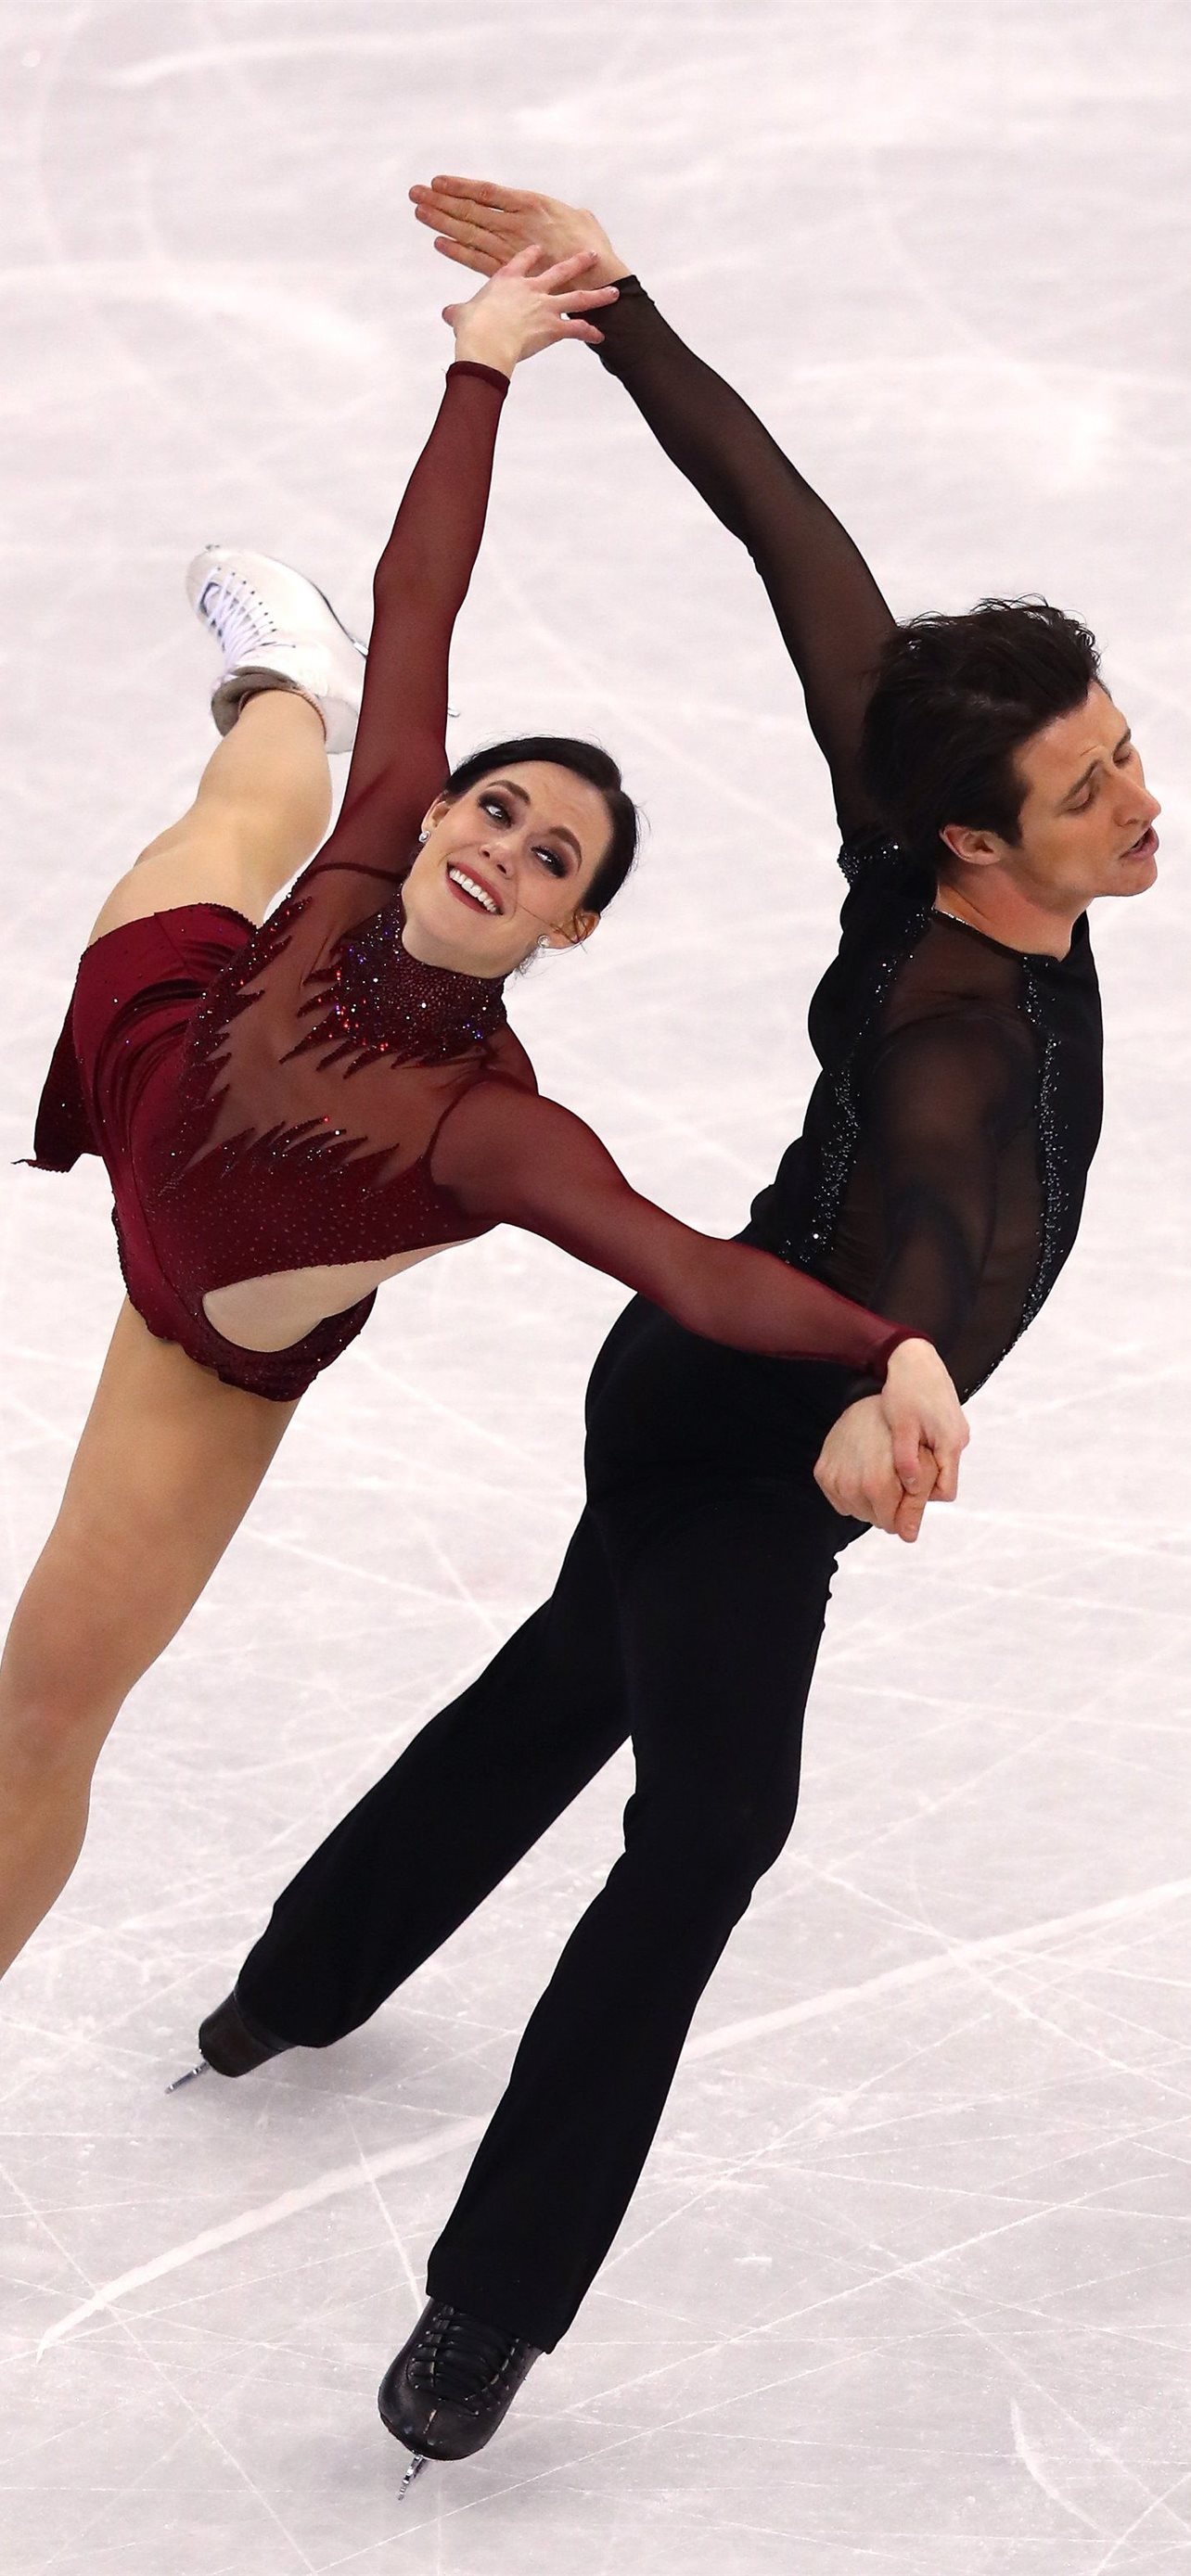 Ice Dancing: Tessa Virtue and Scott Moir, The 2018 Olympic gold medalists, Duo of figure skaters. 1290x2780 HD Wallpaper.